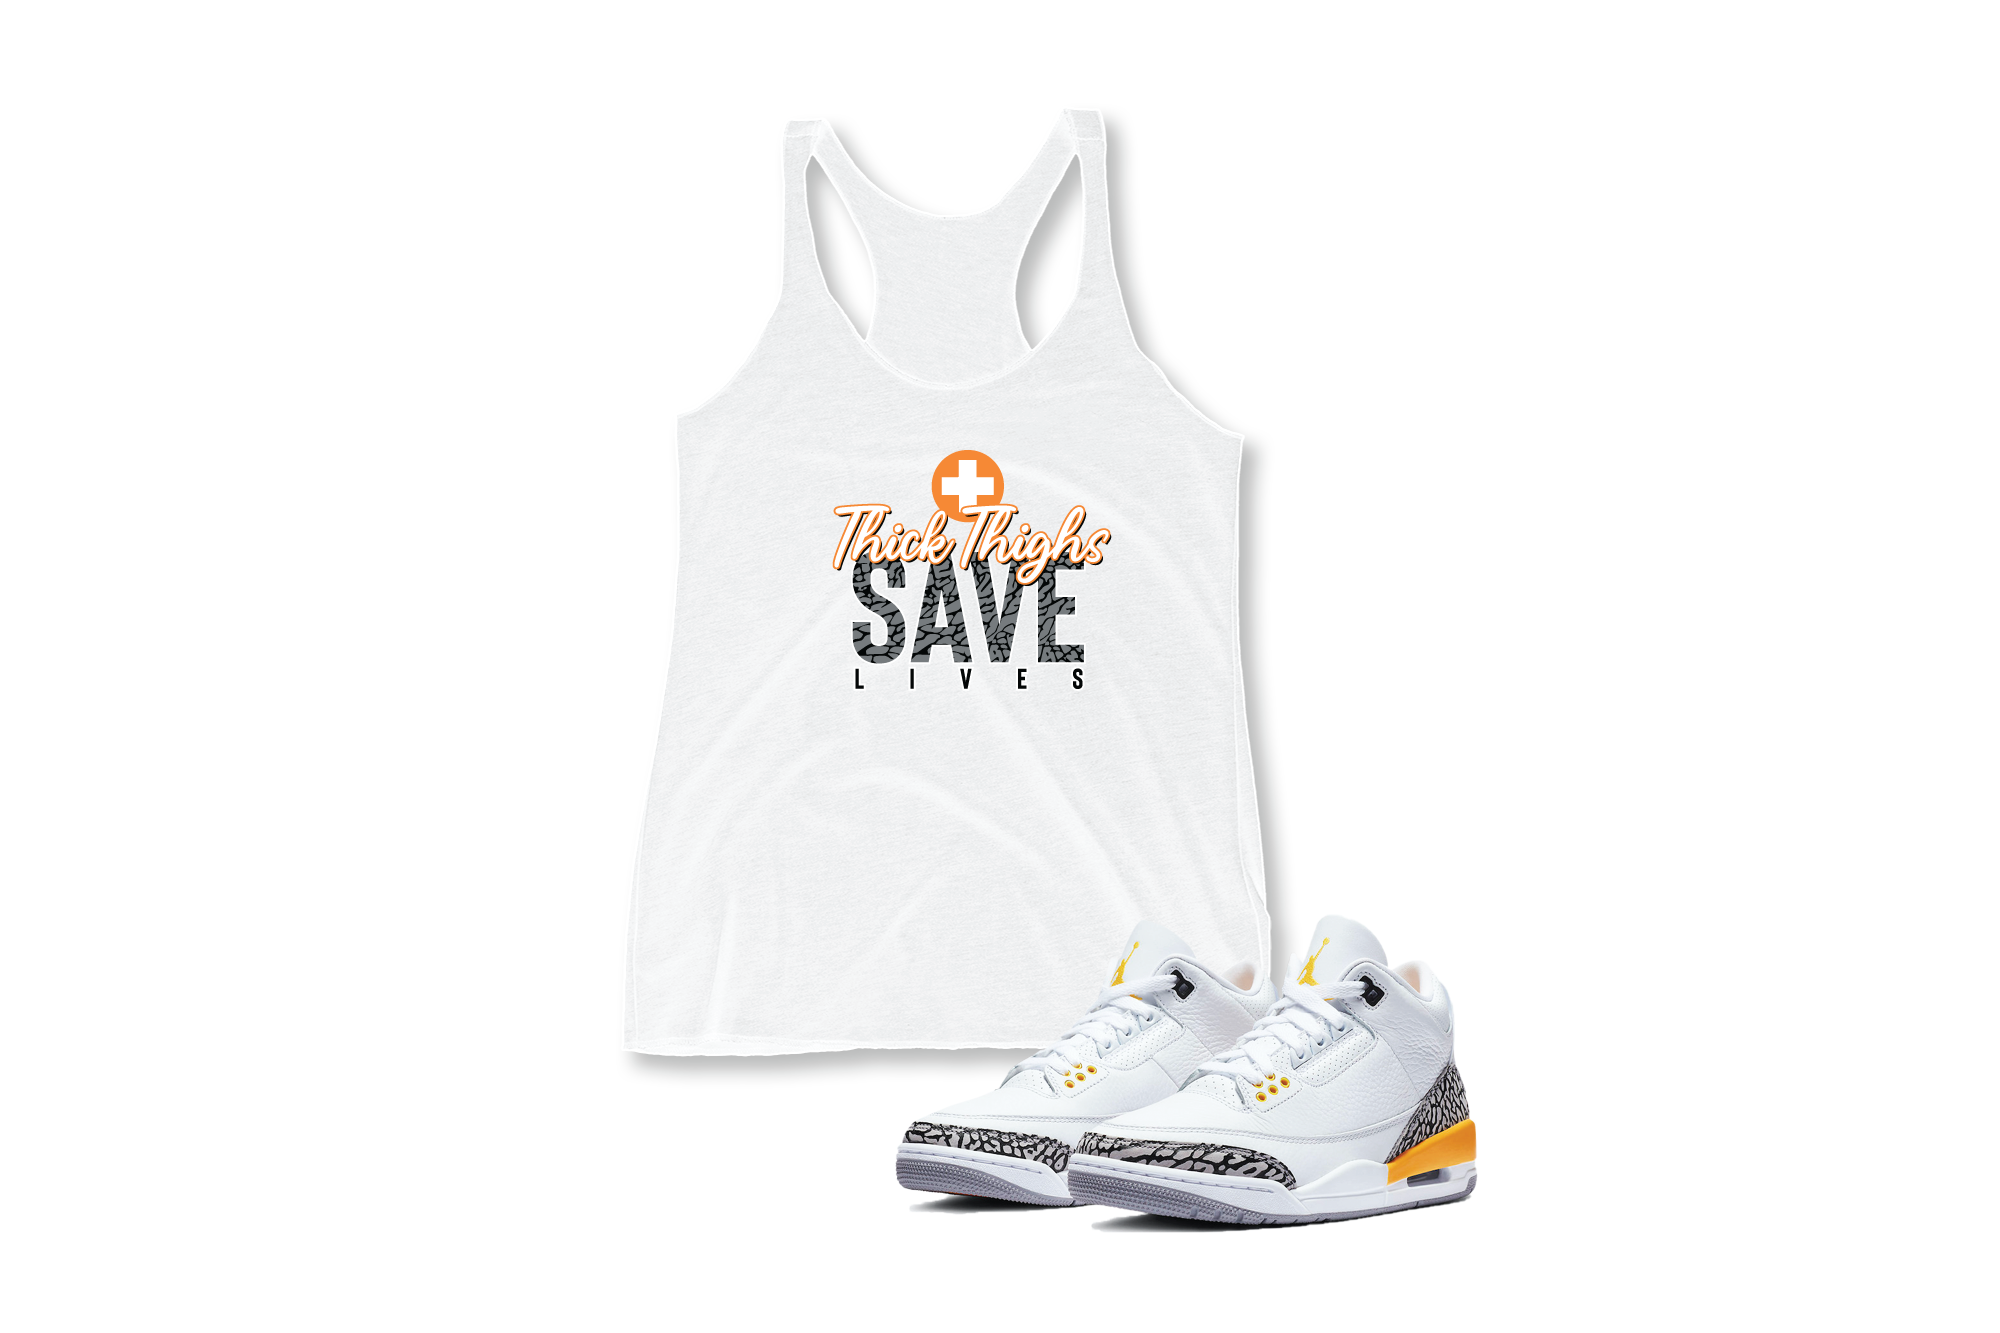 'Thick Thighs Save Lives' in Laser Orange CW Women's Racerback Tank